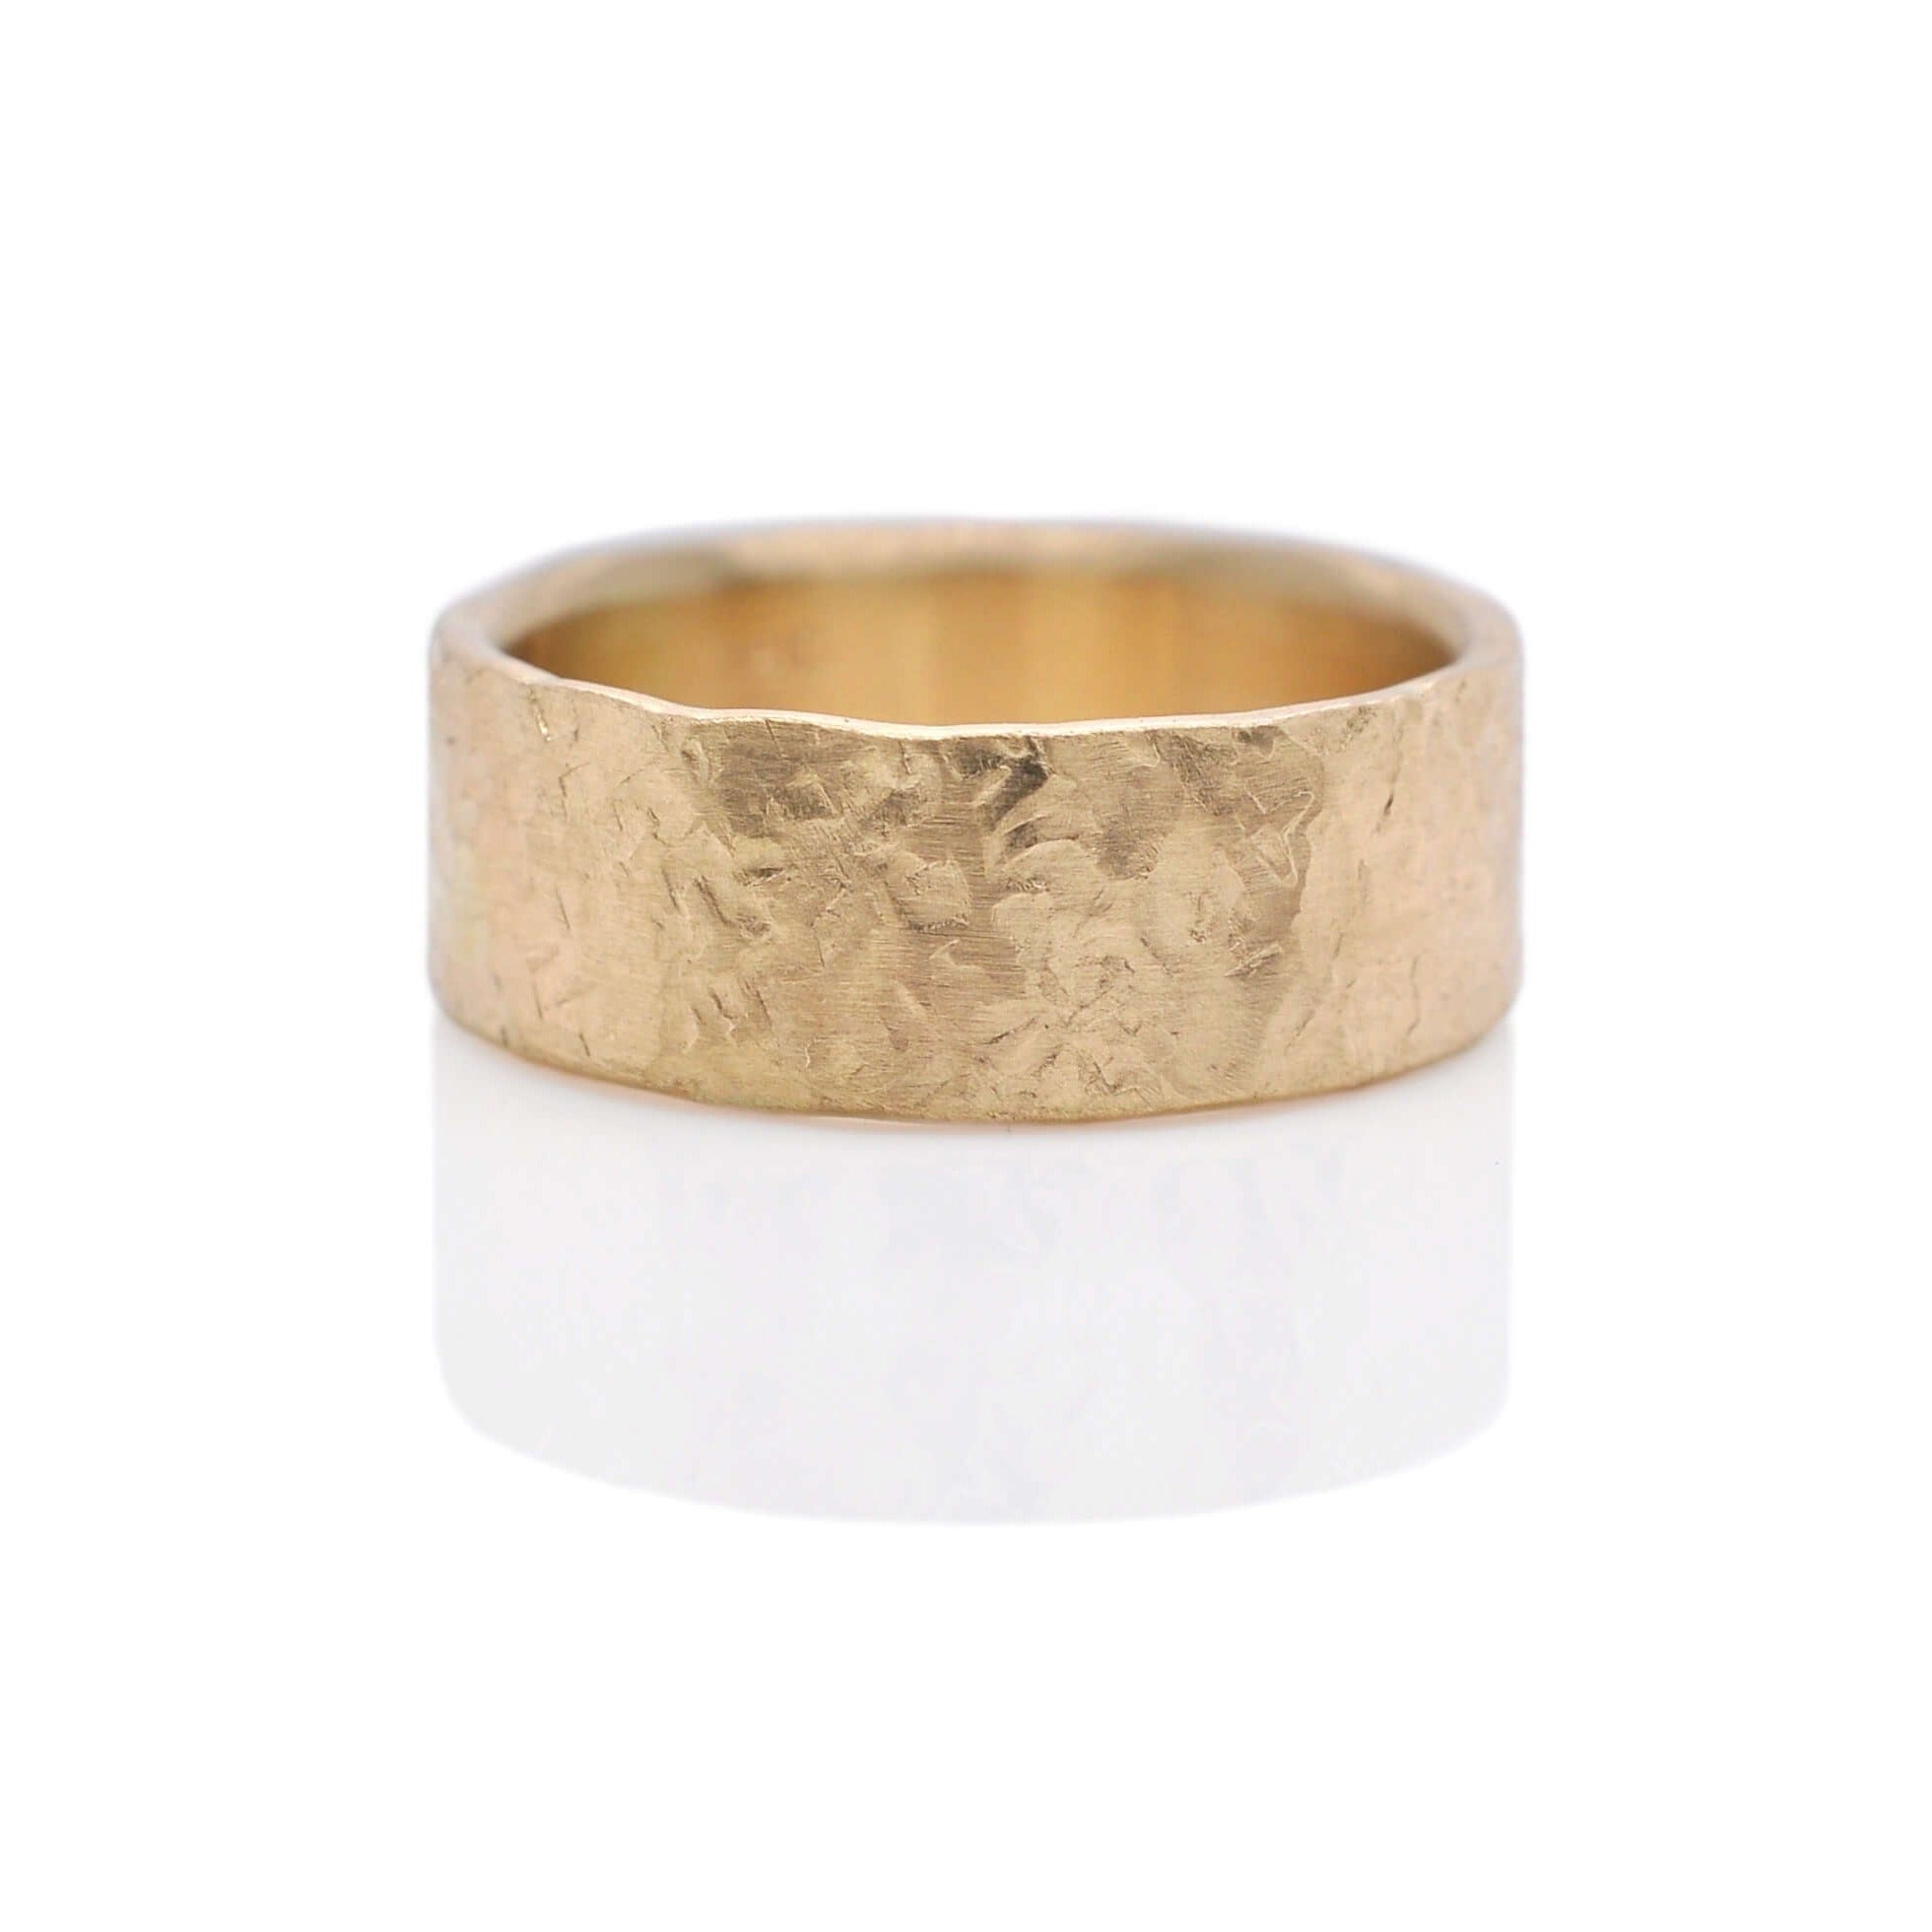 Silk hammered 14k yellow gold wedding band for him, her, them. Handmade with recycled gold.